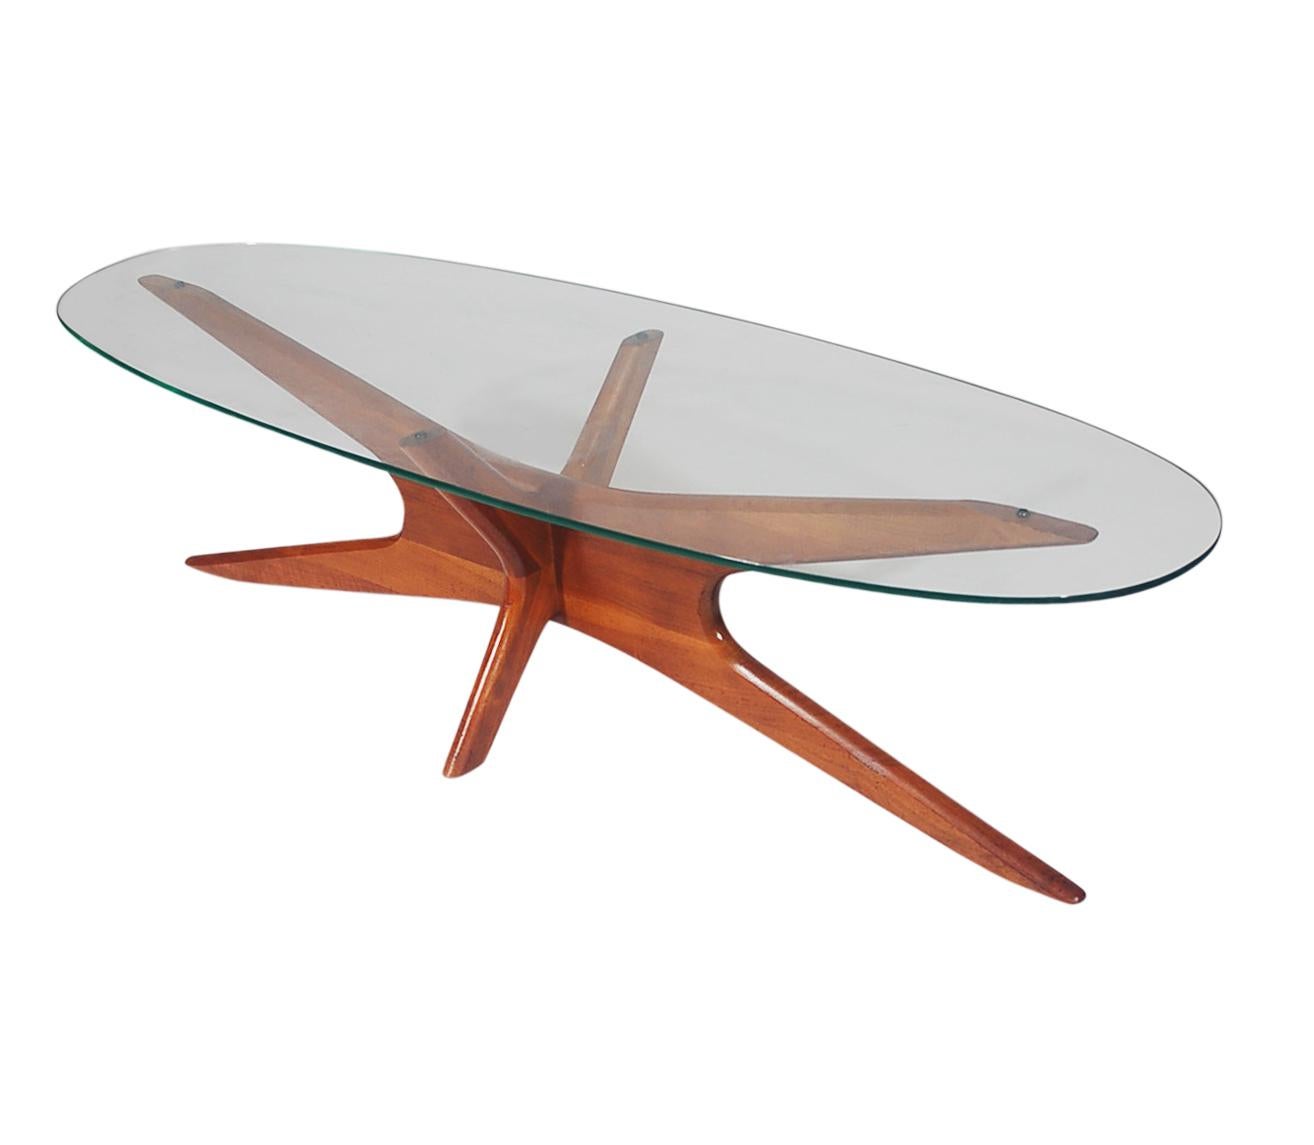 North American Mid-Century Modern Oval Walnut and Glass Cocktail Table by Adrian Pearsall For Sale